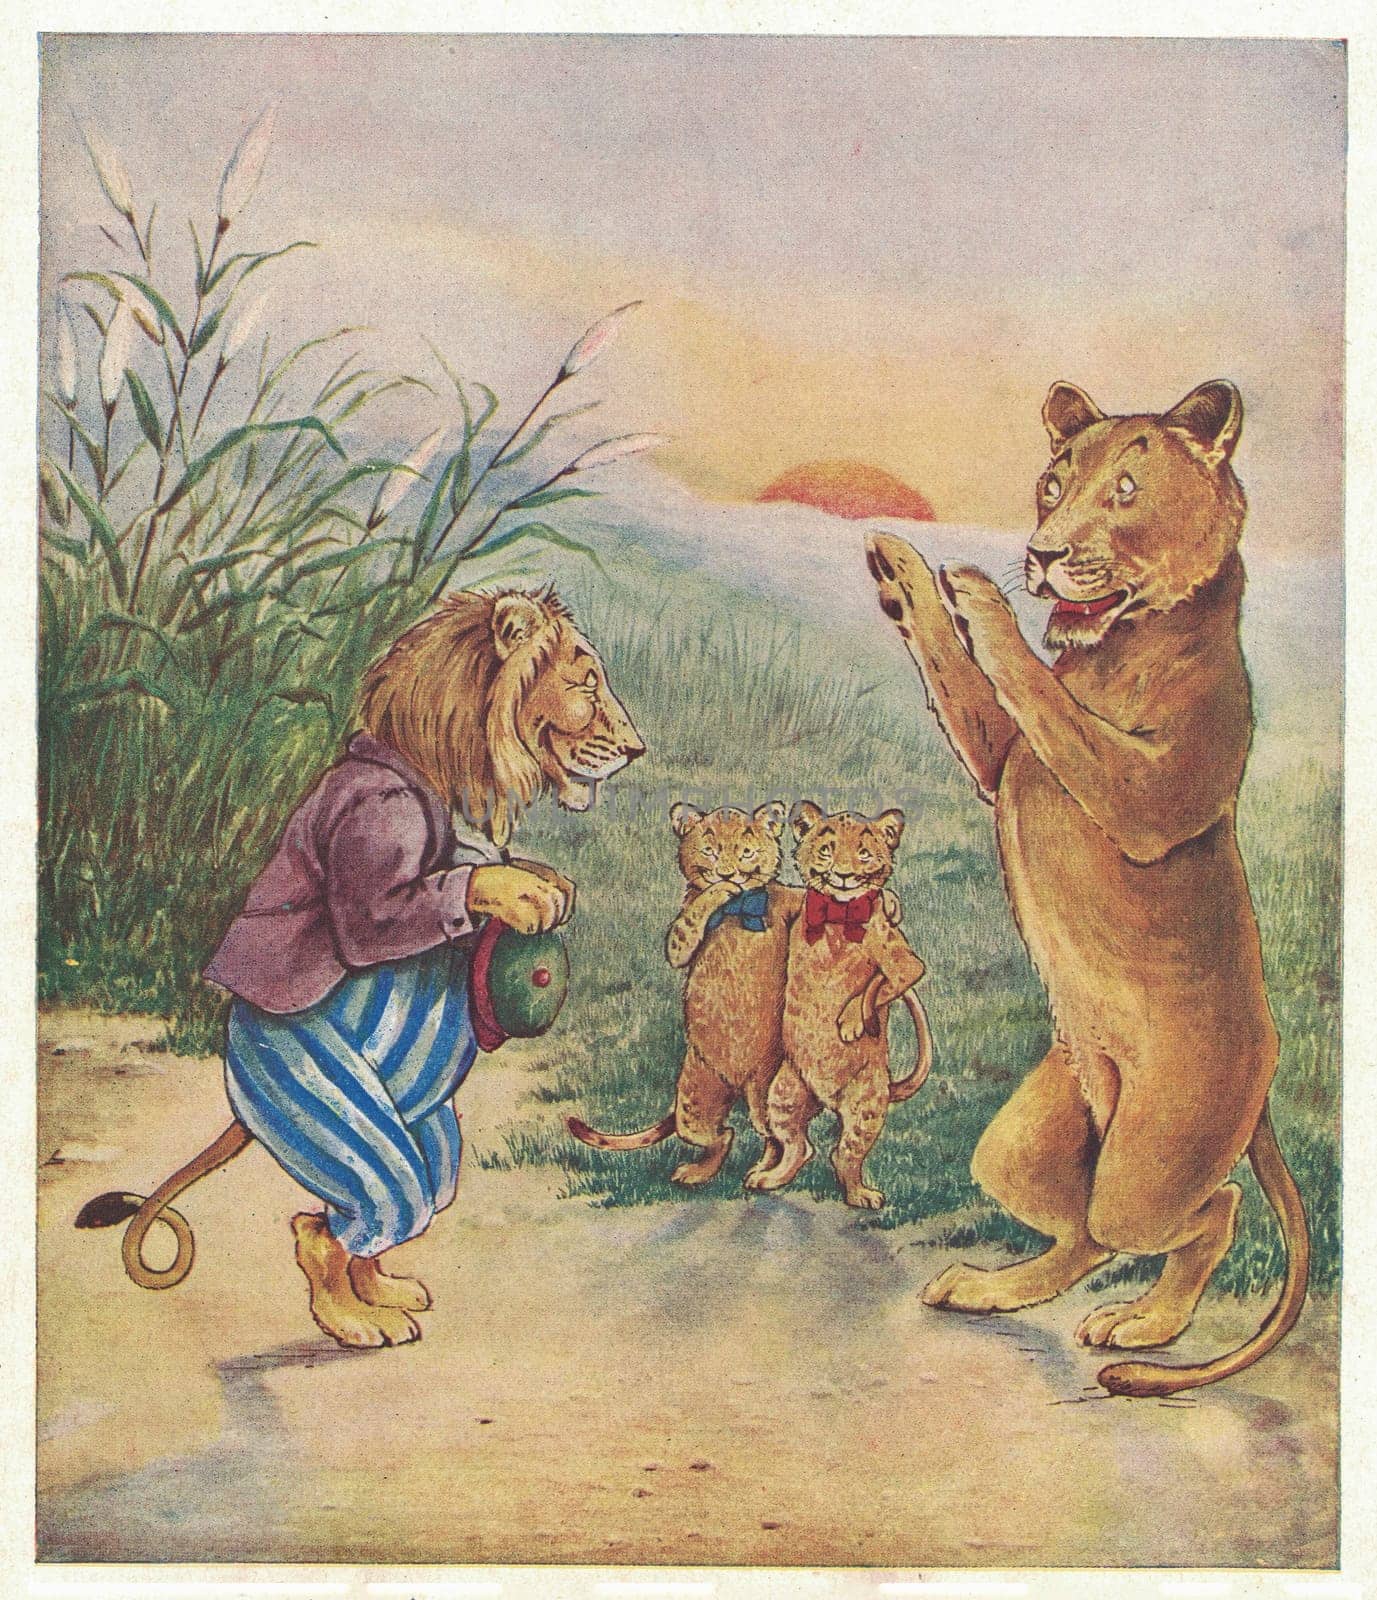 Colorful antique illustration shows a cute lion's family. Vintage drawing shows a happy lion's family. Old picture from fairy tale book. Storybook illustration published 1910. by roman_nerud